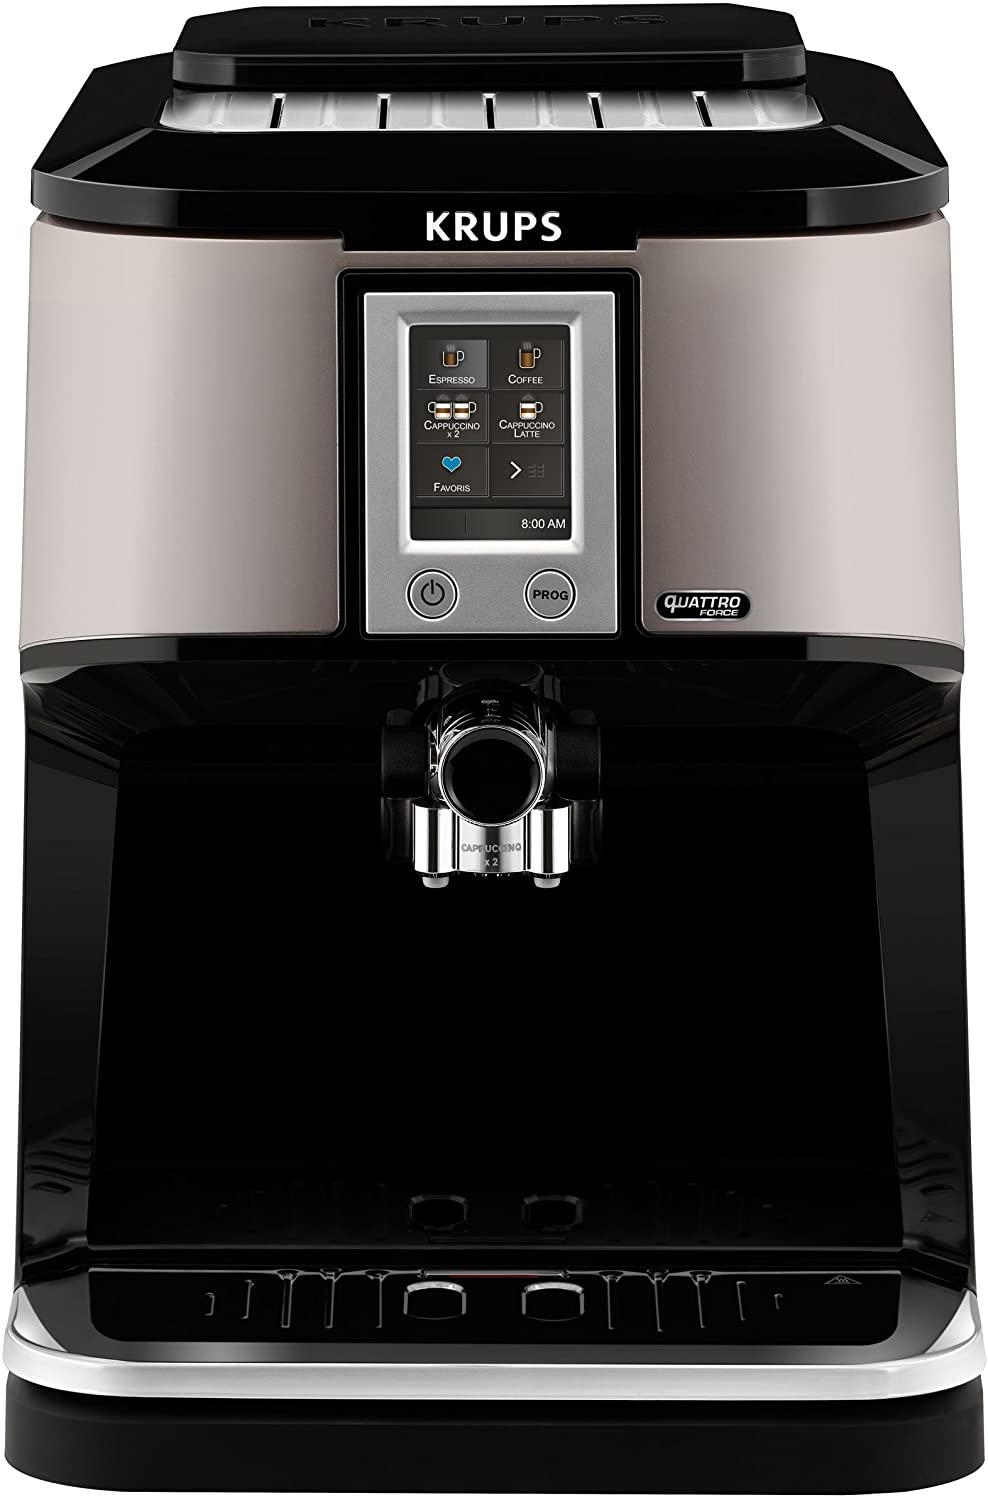 Krups EA880E Fully Automatic Coffee Machine One-Touch Cappuccino, Two-in-One Touch Function, TFT Colour Display with Touchscreen, 1.7 L, 15 Bar, Silver/Black